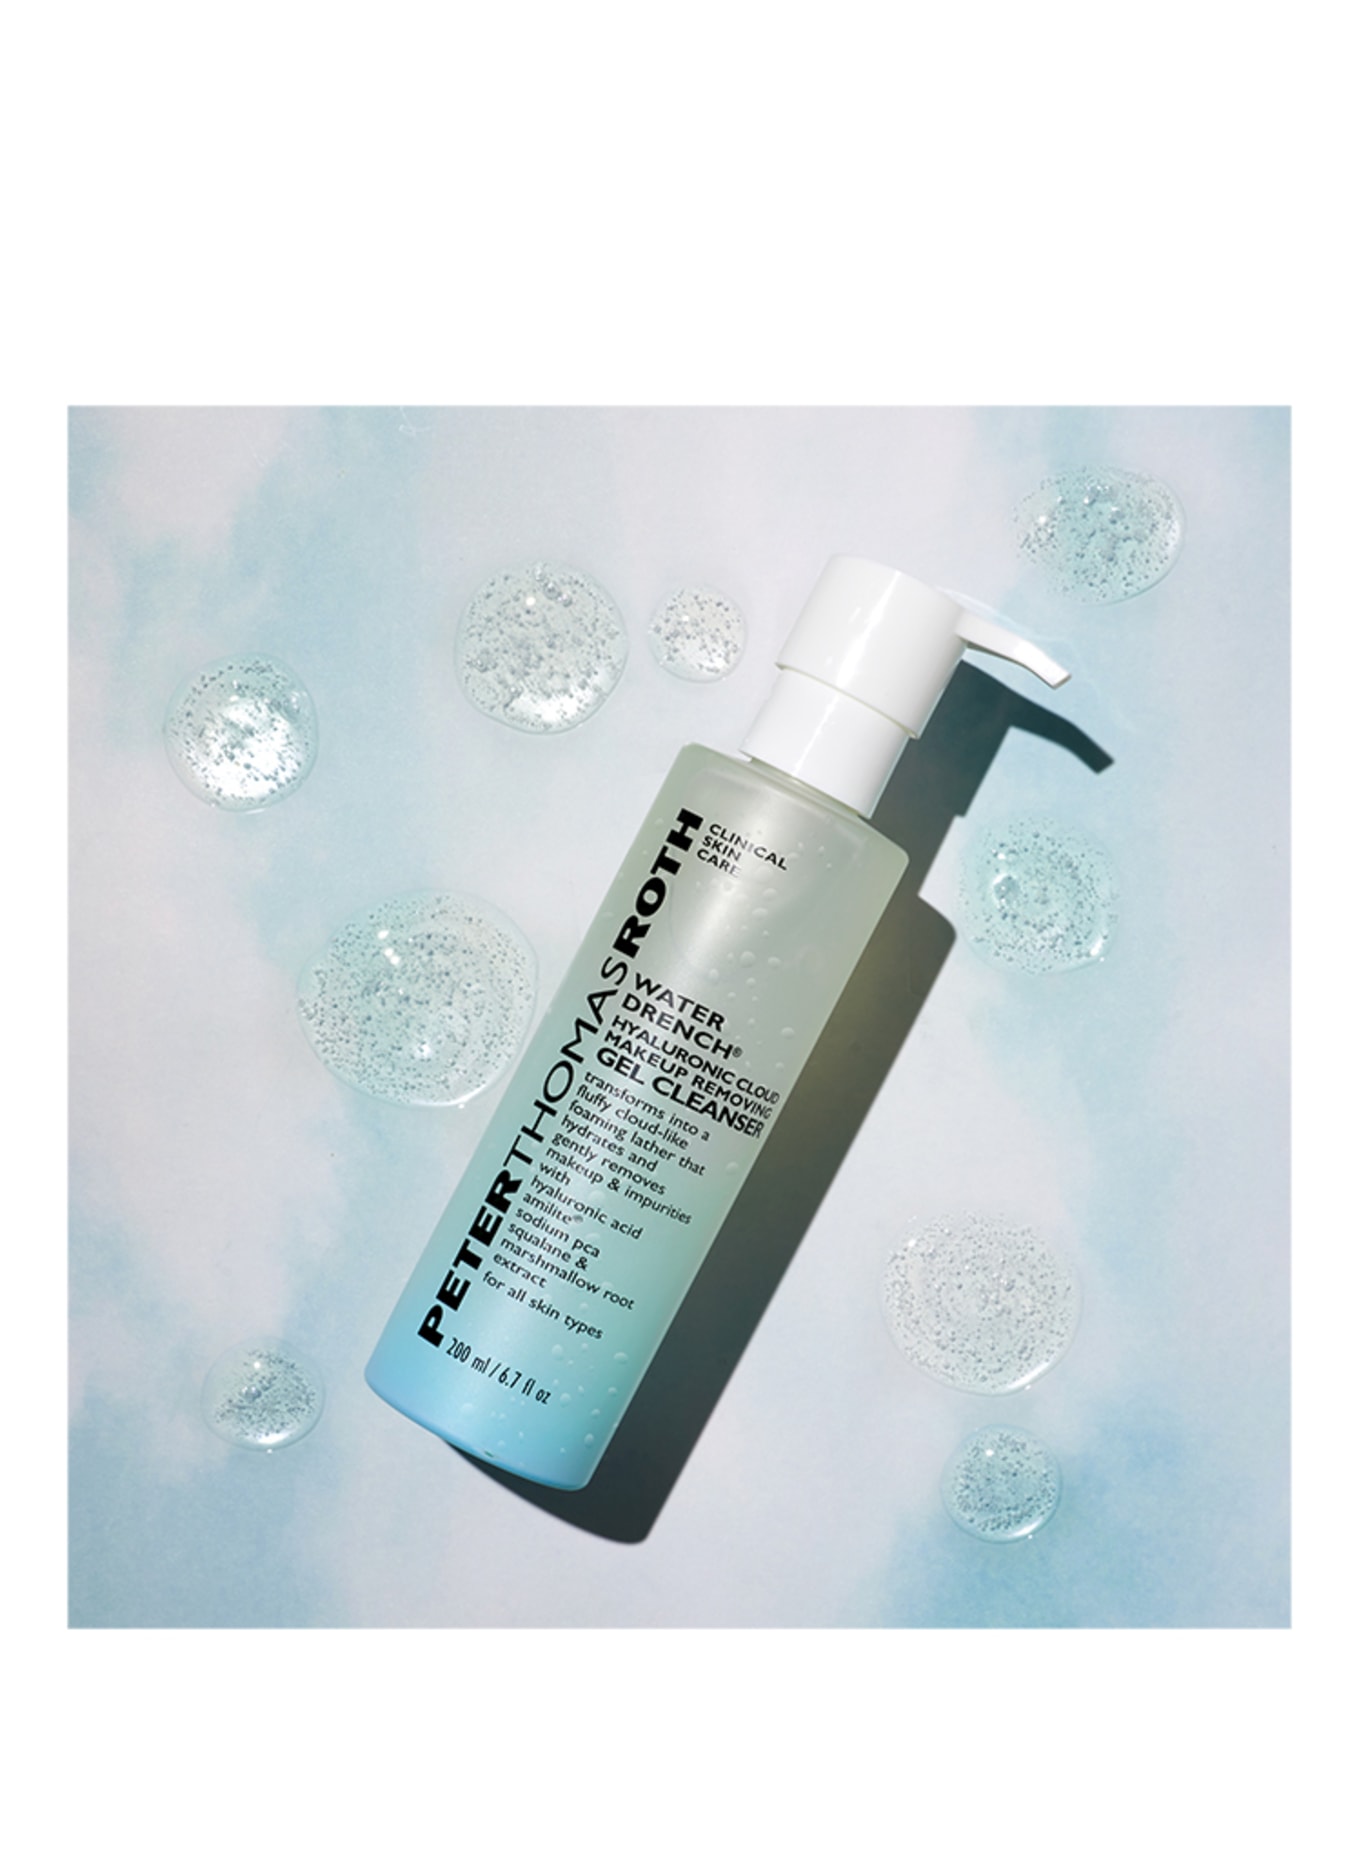 PETER THOMAS ROTH WATER DRENCH (Obrázek 4)